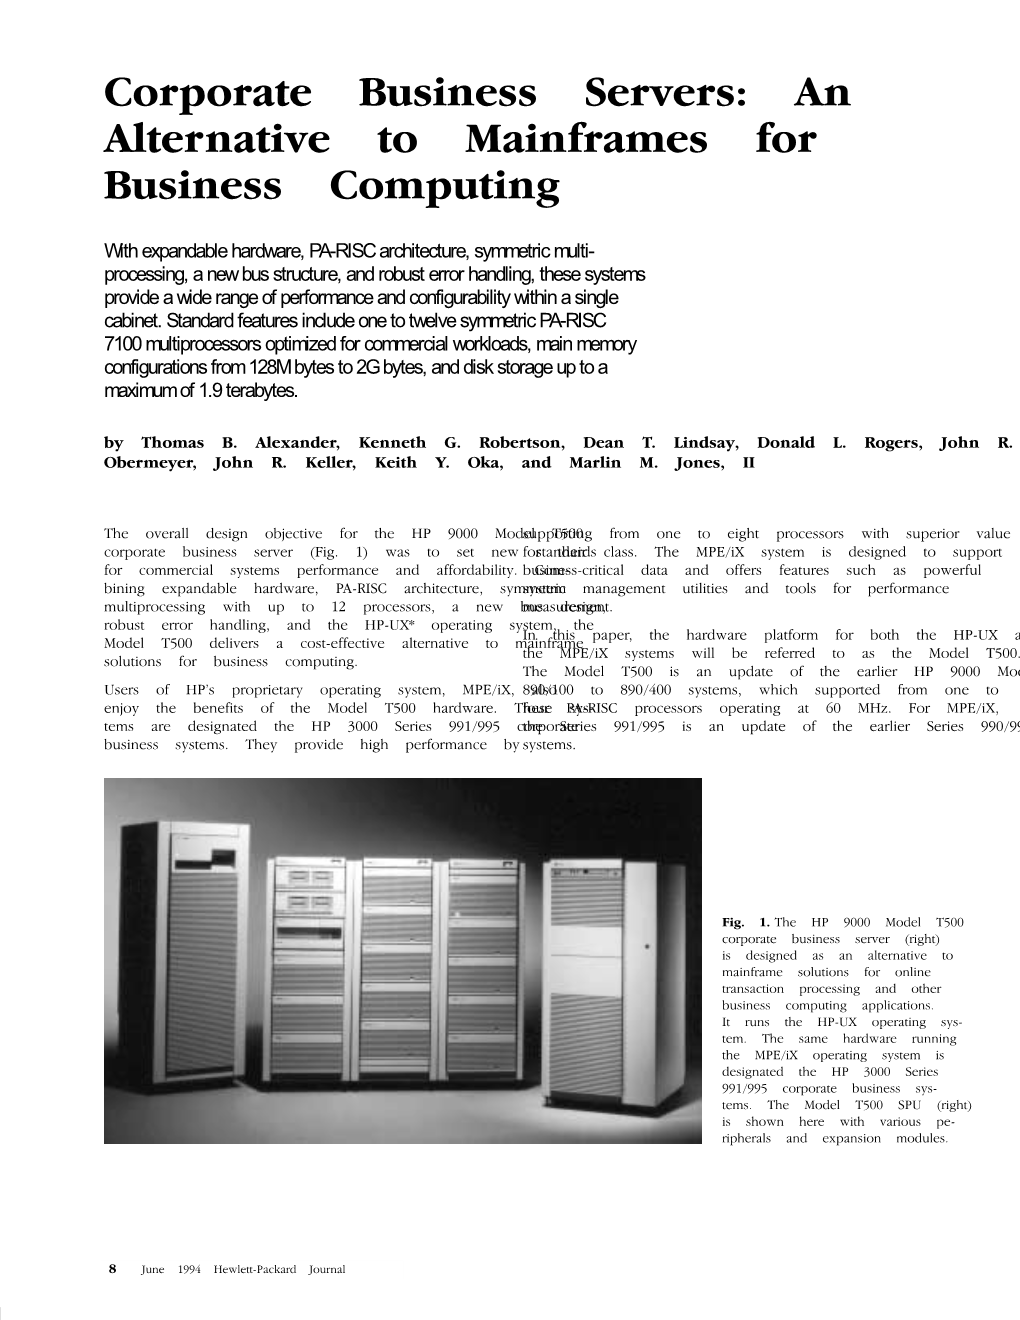 An Alternative to Mainframes for Business Computing